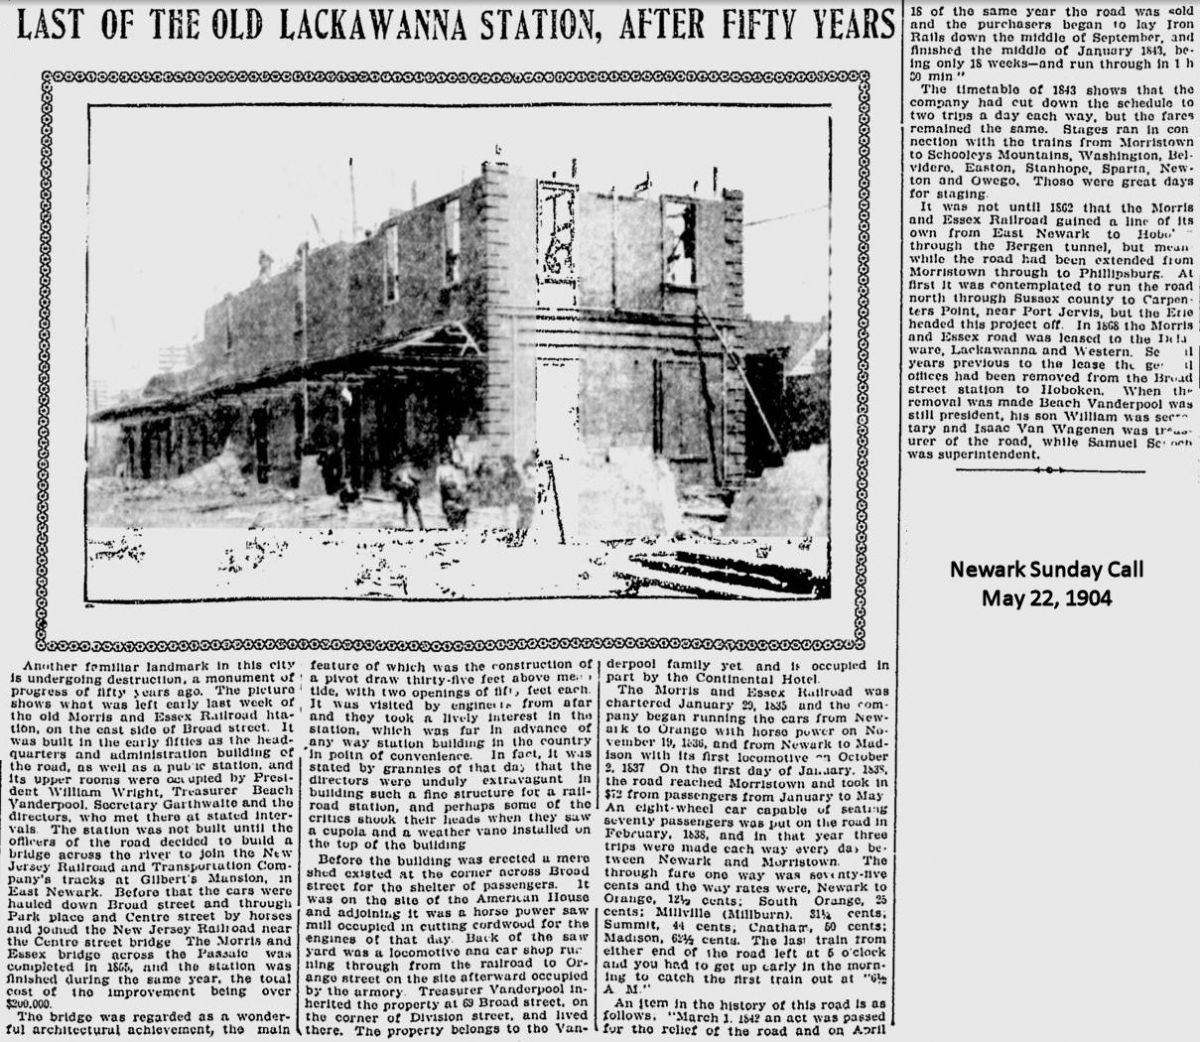 Last of the Old Lackawanna Station, After Fifty Years
May 22, 1904
